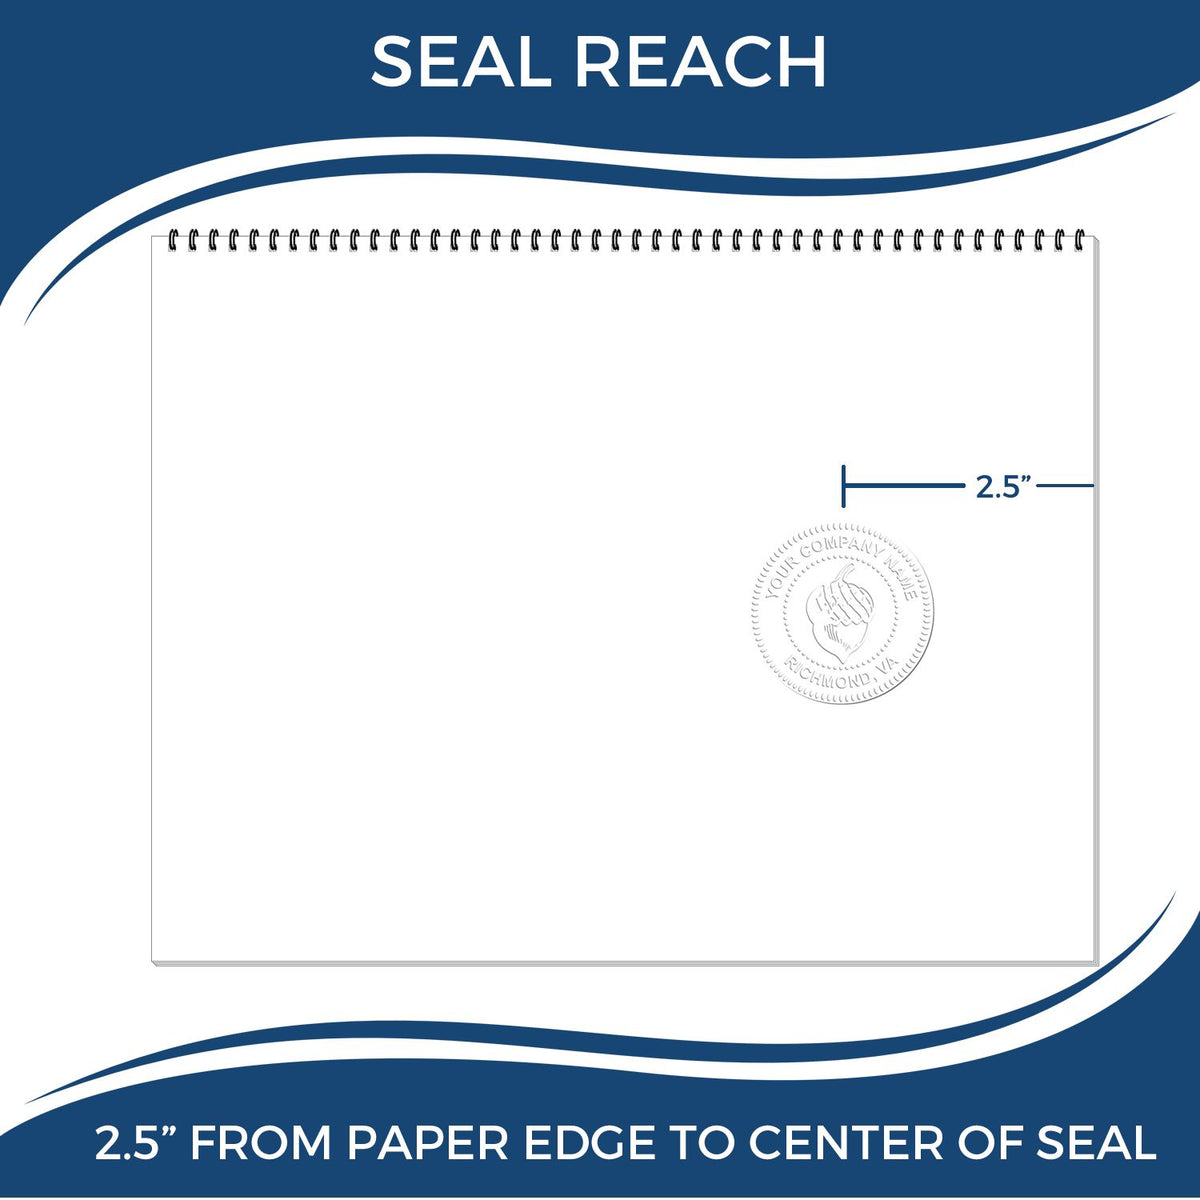 An infographic showing the seal reach which is represented by a ruler and a miniature seal image of the Heavy Duty Cast Iron North Dakota Engineer Seal Embosser